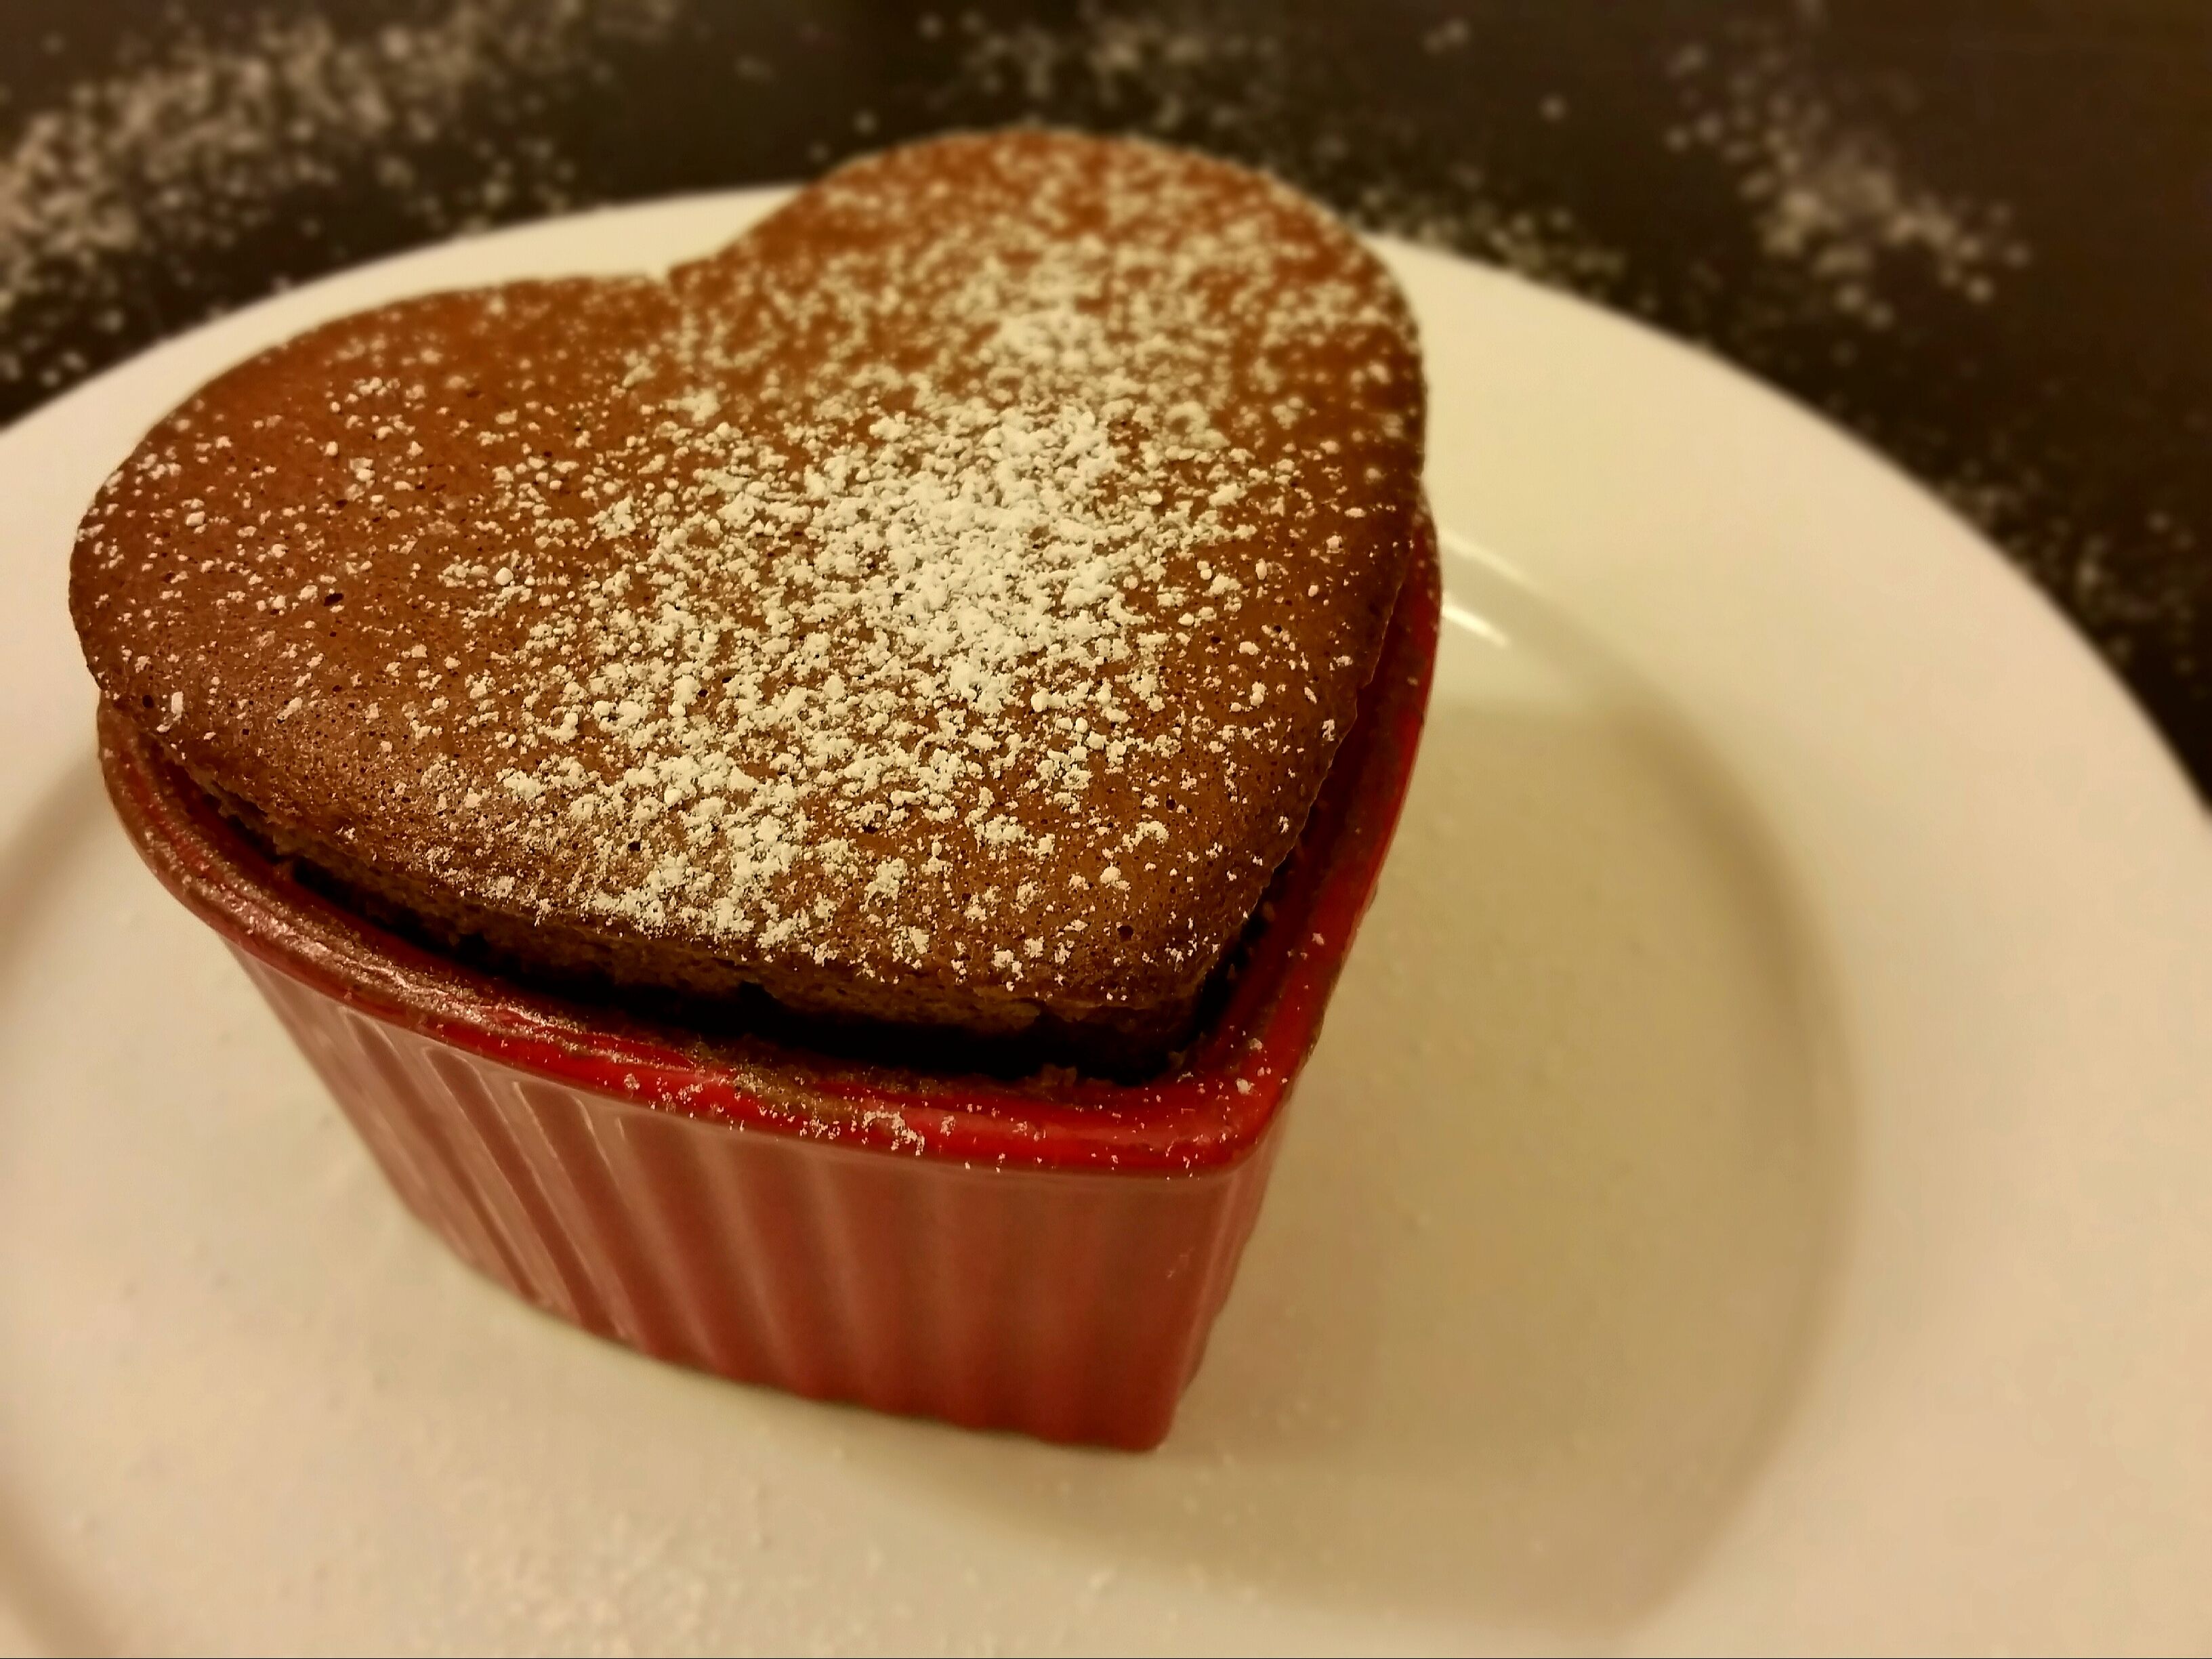 Chocolate Soufflé with Passionfruit-White Chocolate Filling